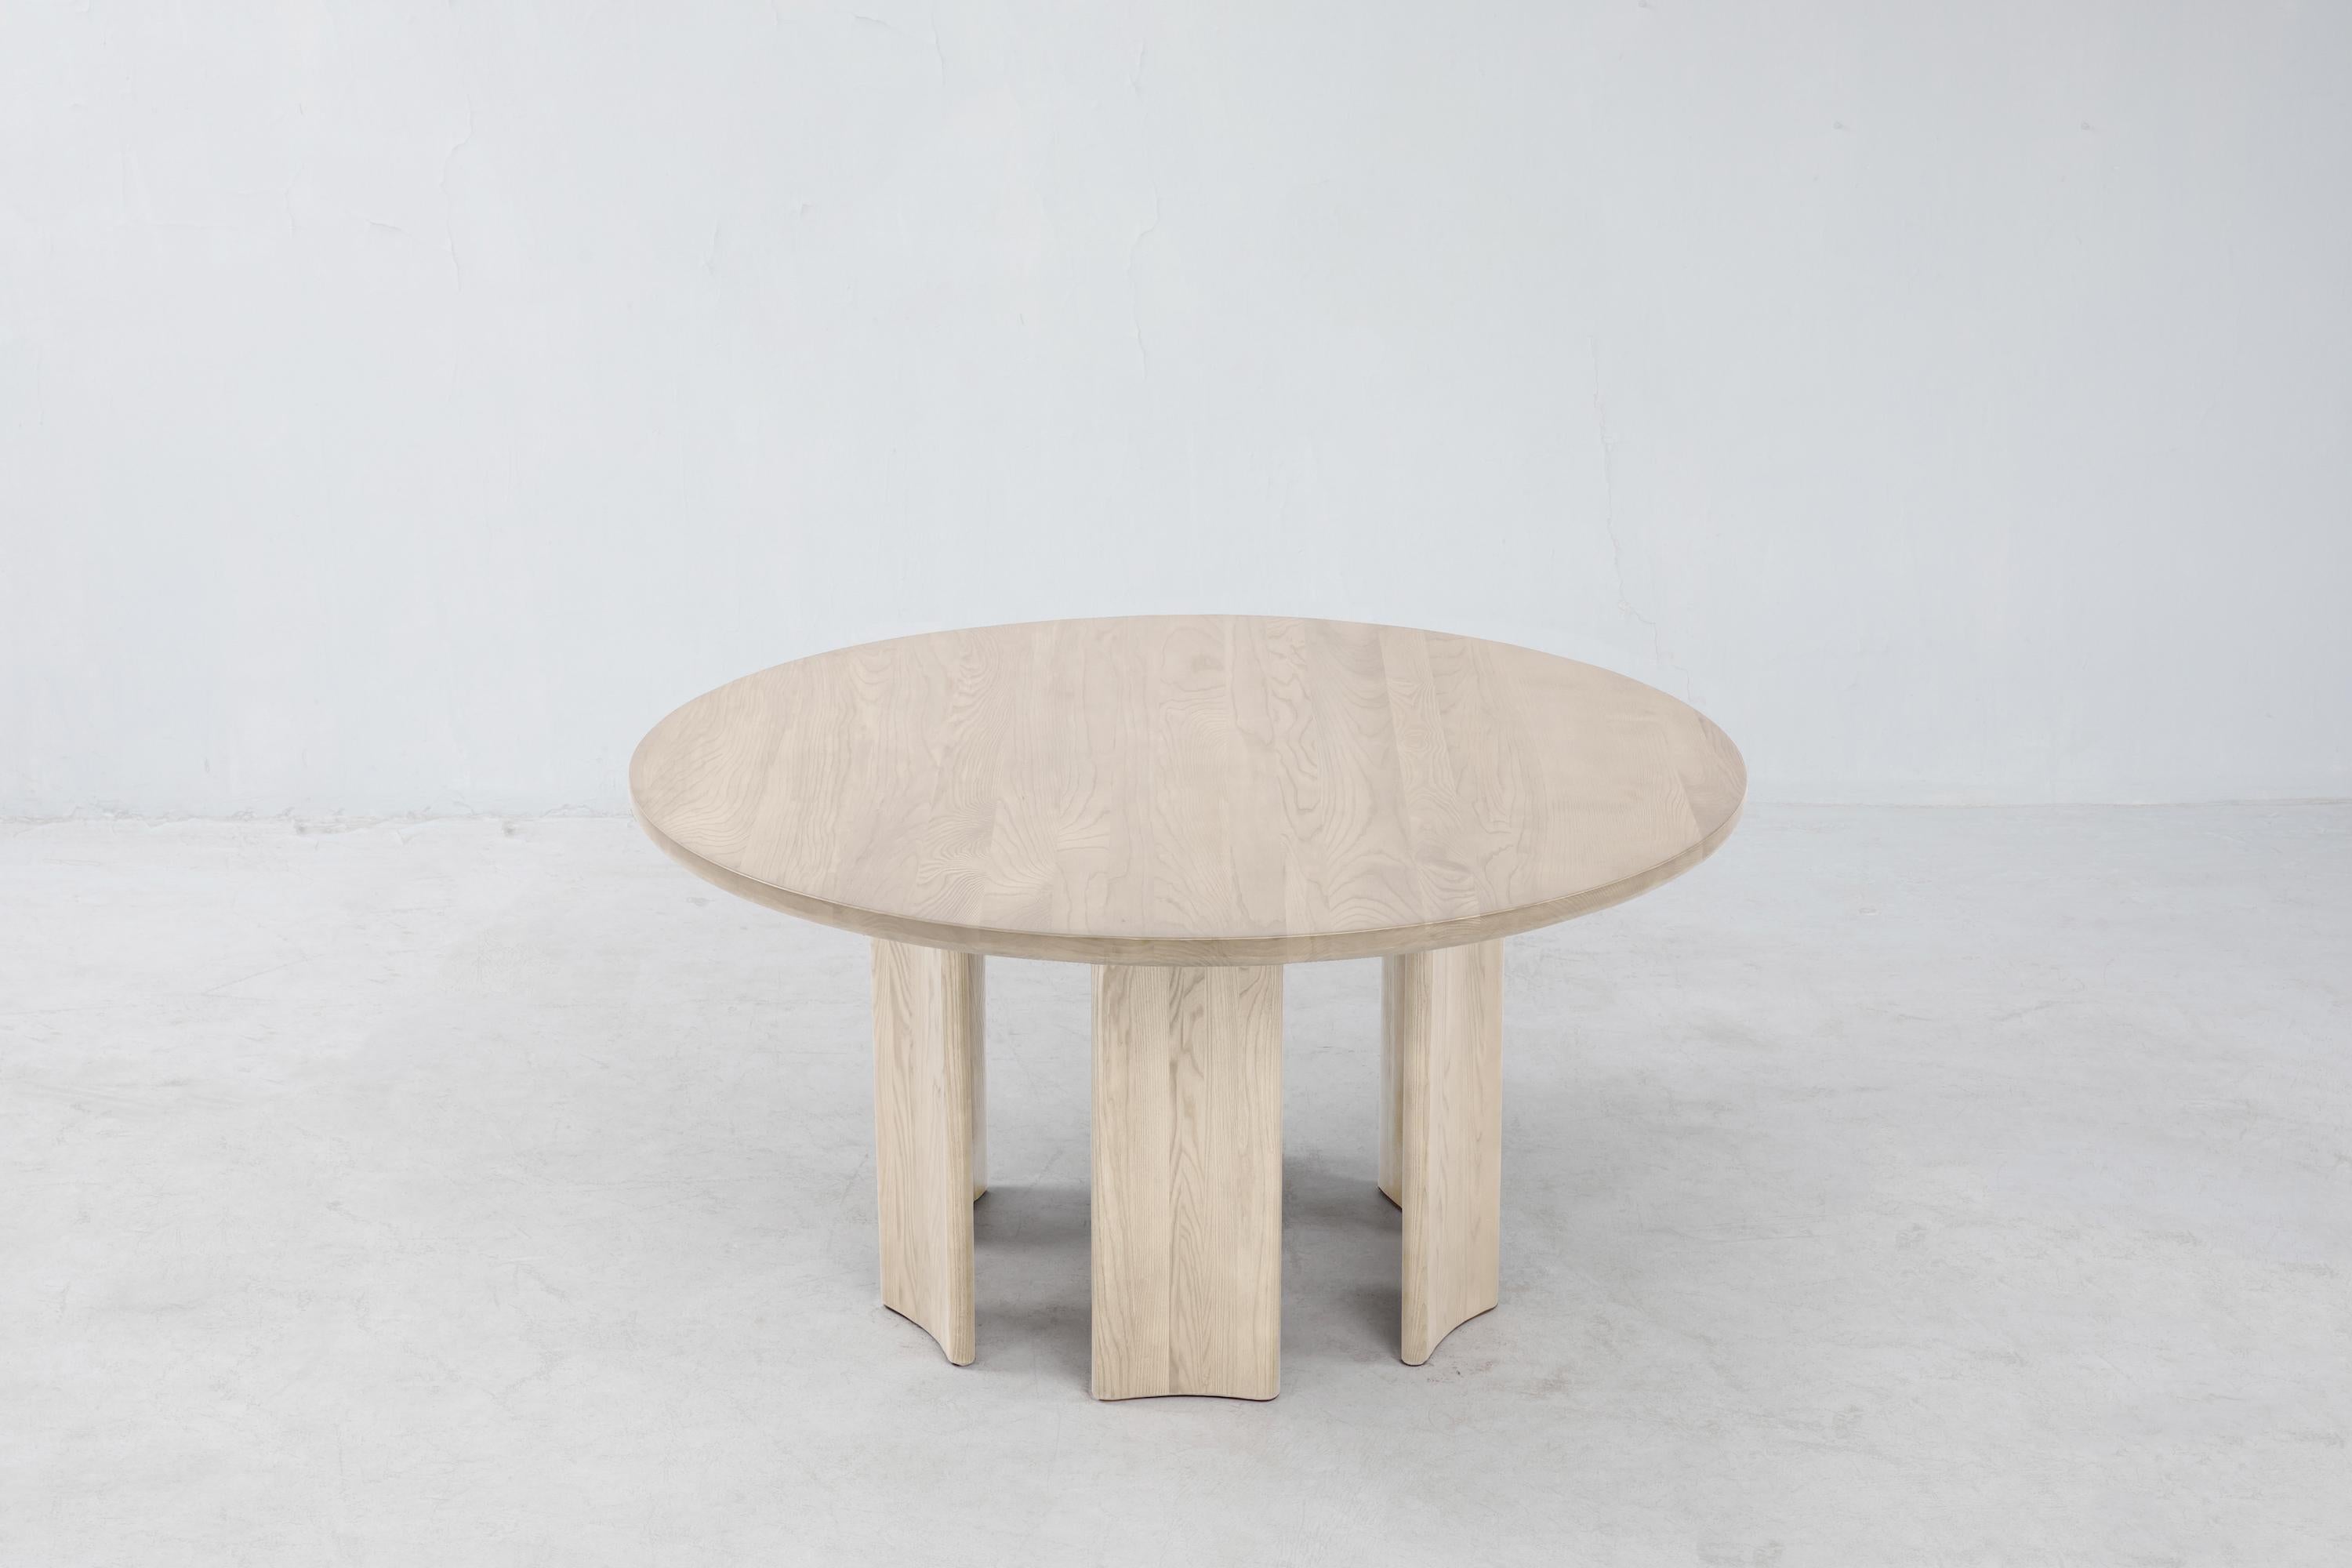 The Crest Round Table is a solid FSC® Certified White Ash dining table. Like the standard Crest Table, the concave columnar legs are invertible. Please note that we make each piece by hand, and every tree is different, so you’ll see slight